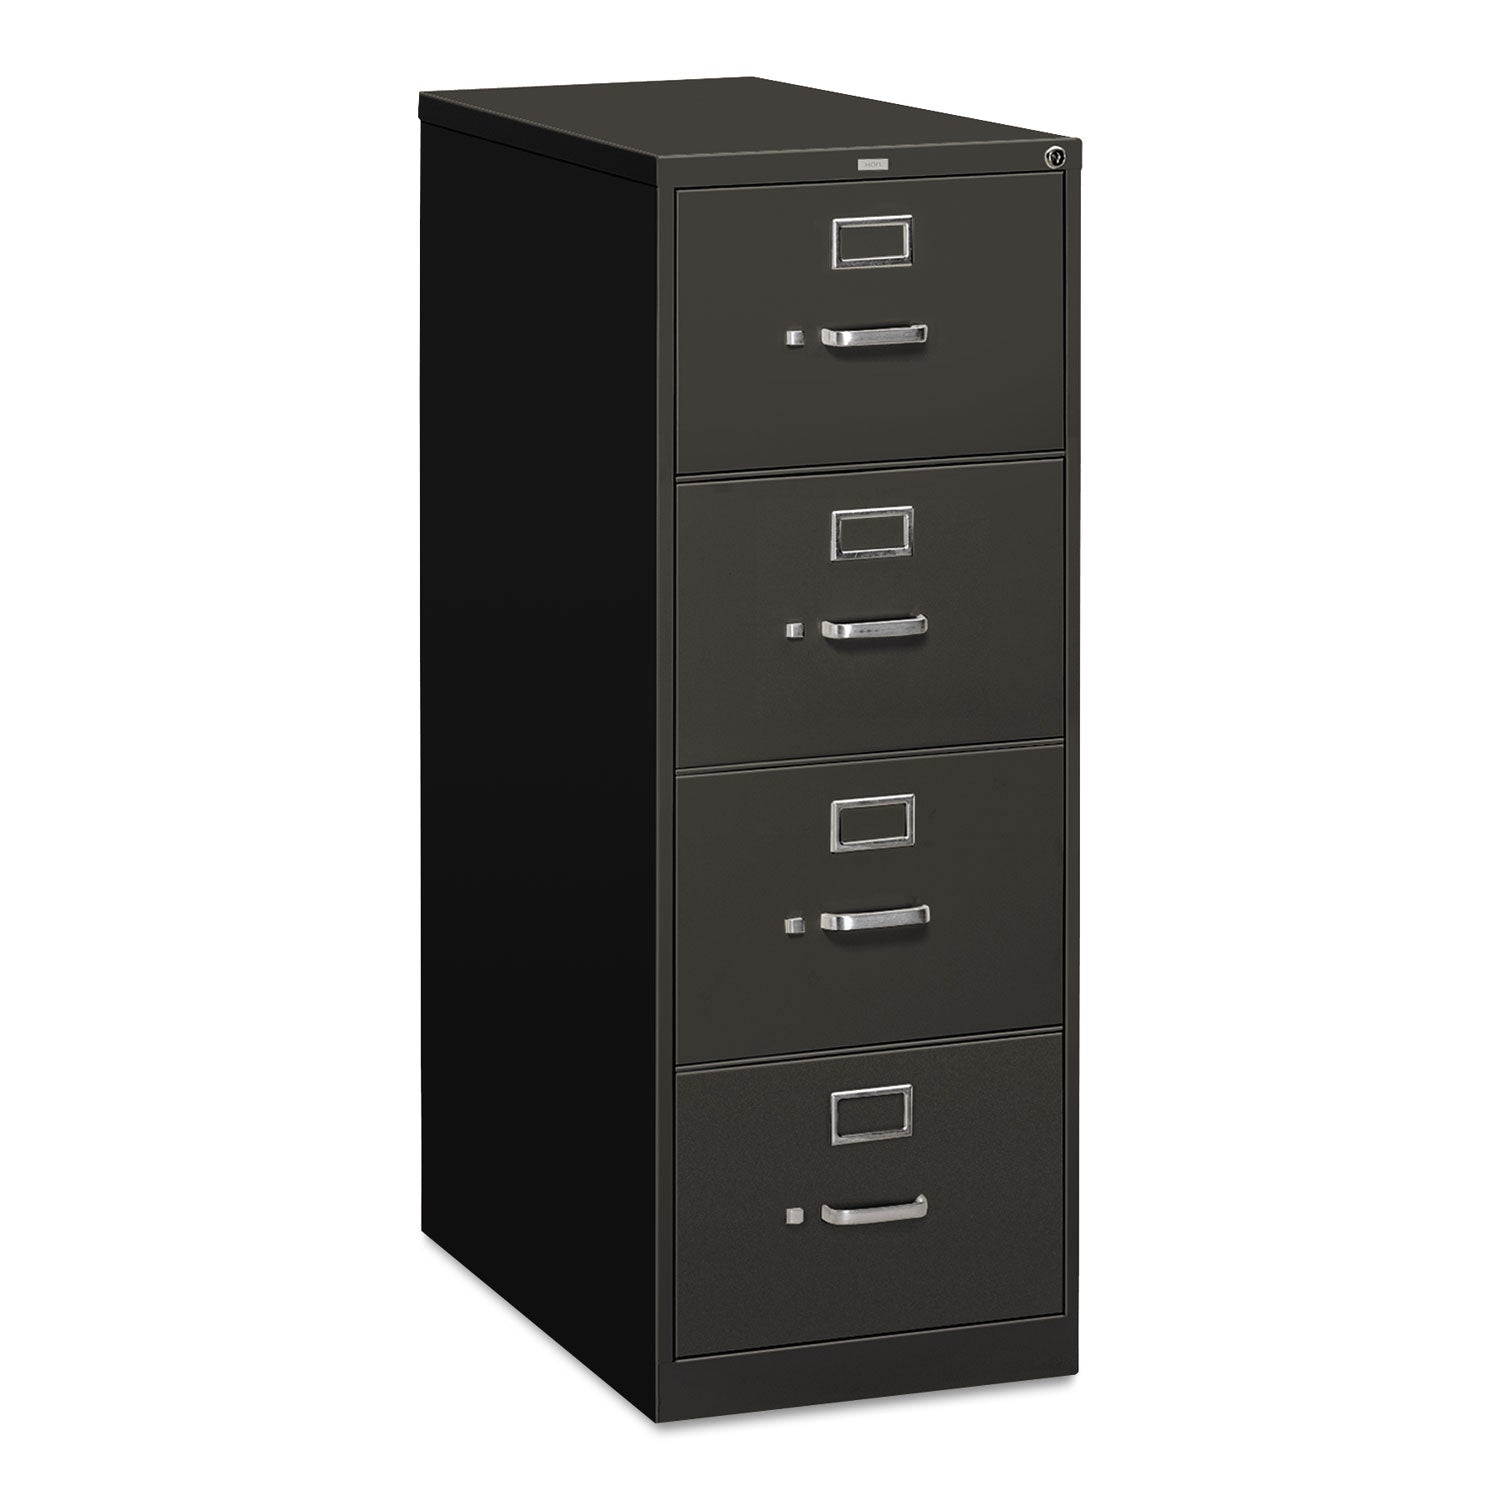 310 Series Vertical File, 4 Legal-Size File Drawers, Charcoal, 18.25" x 26.5" x 52 - 